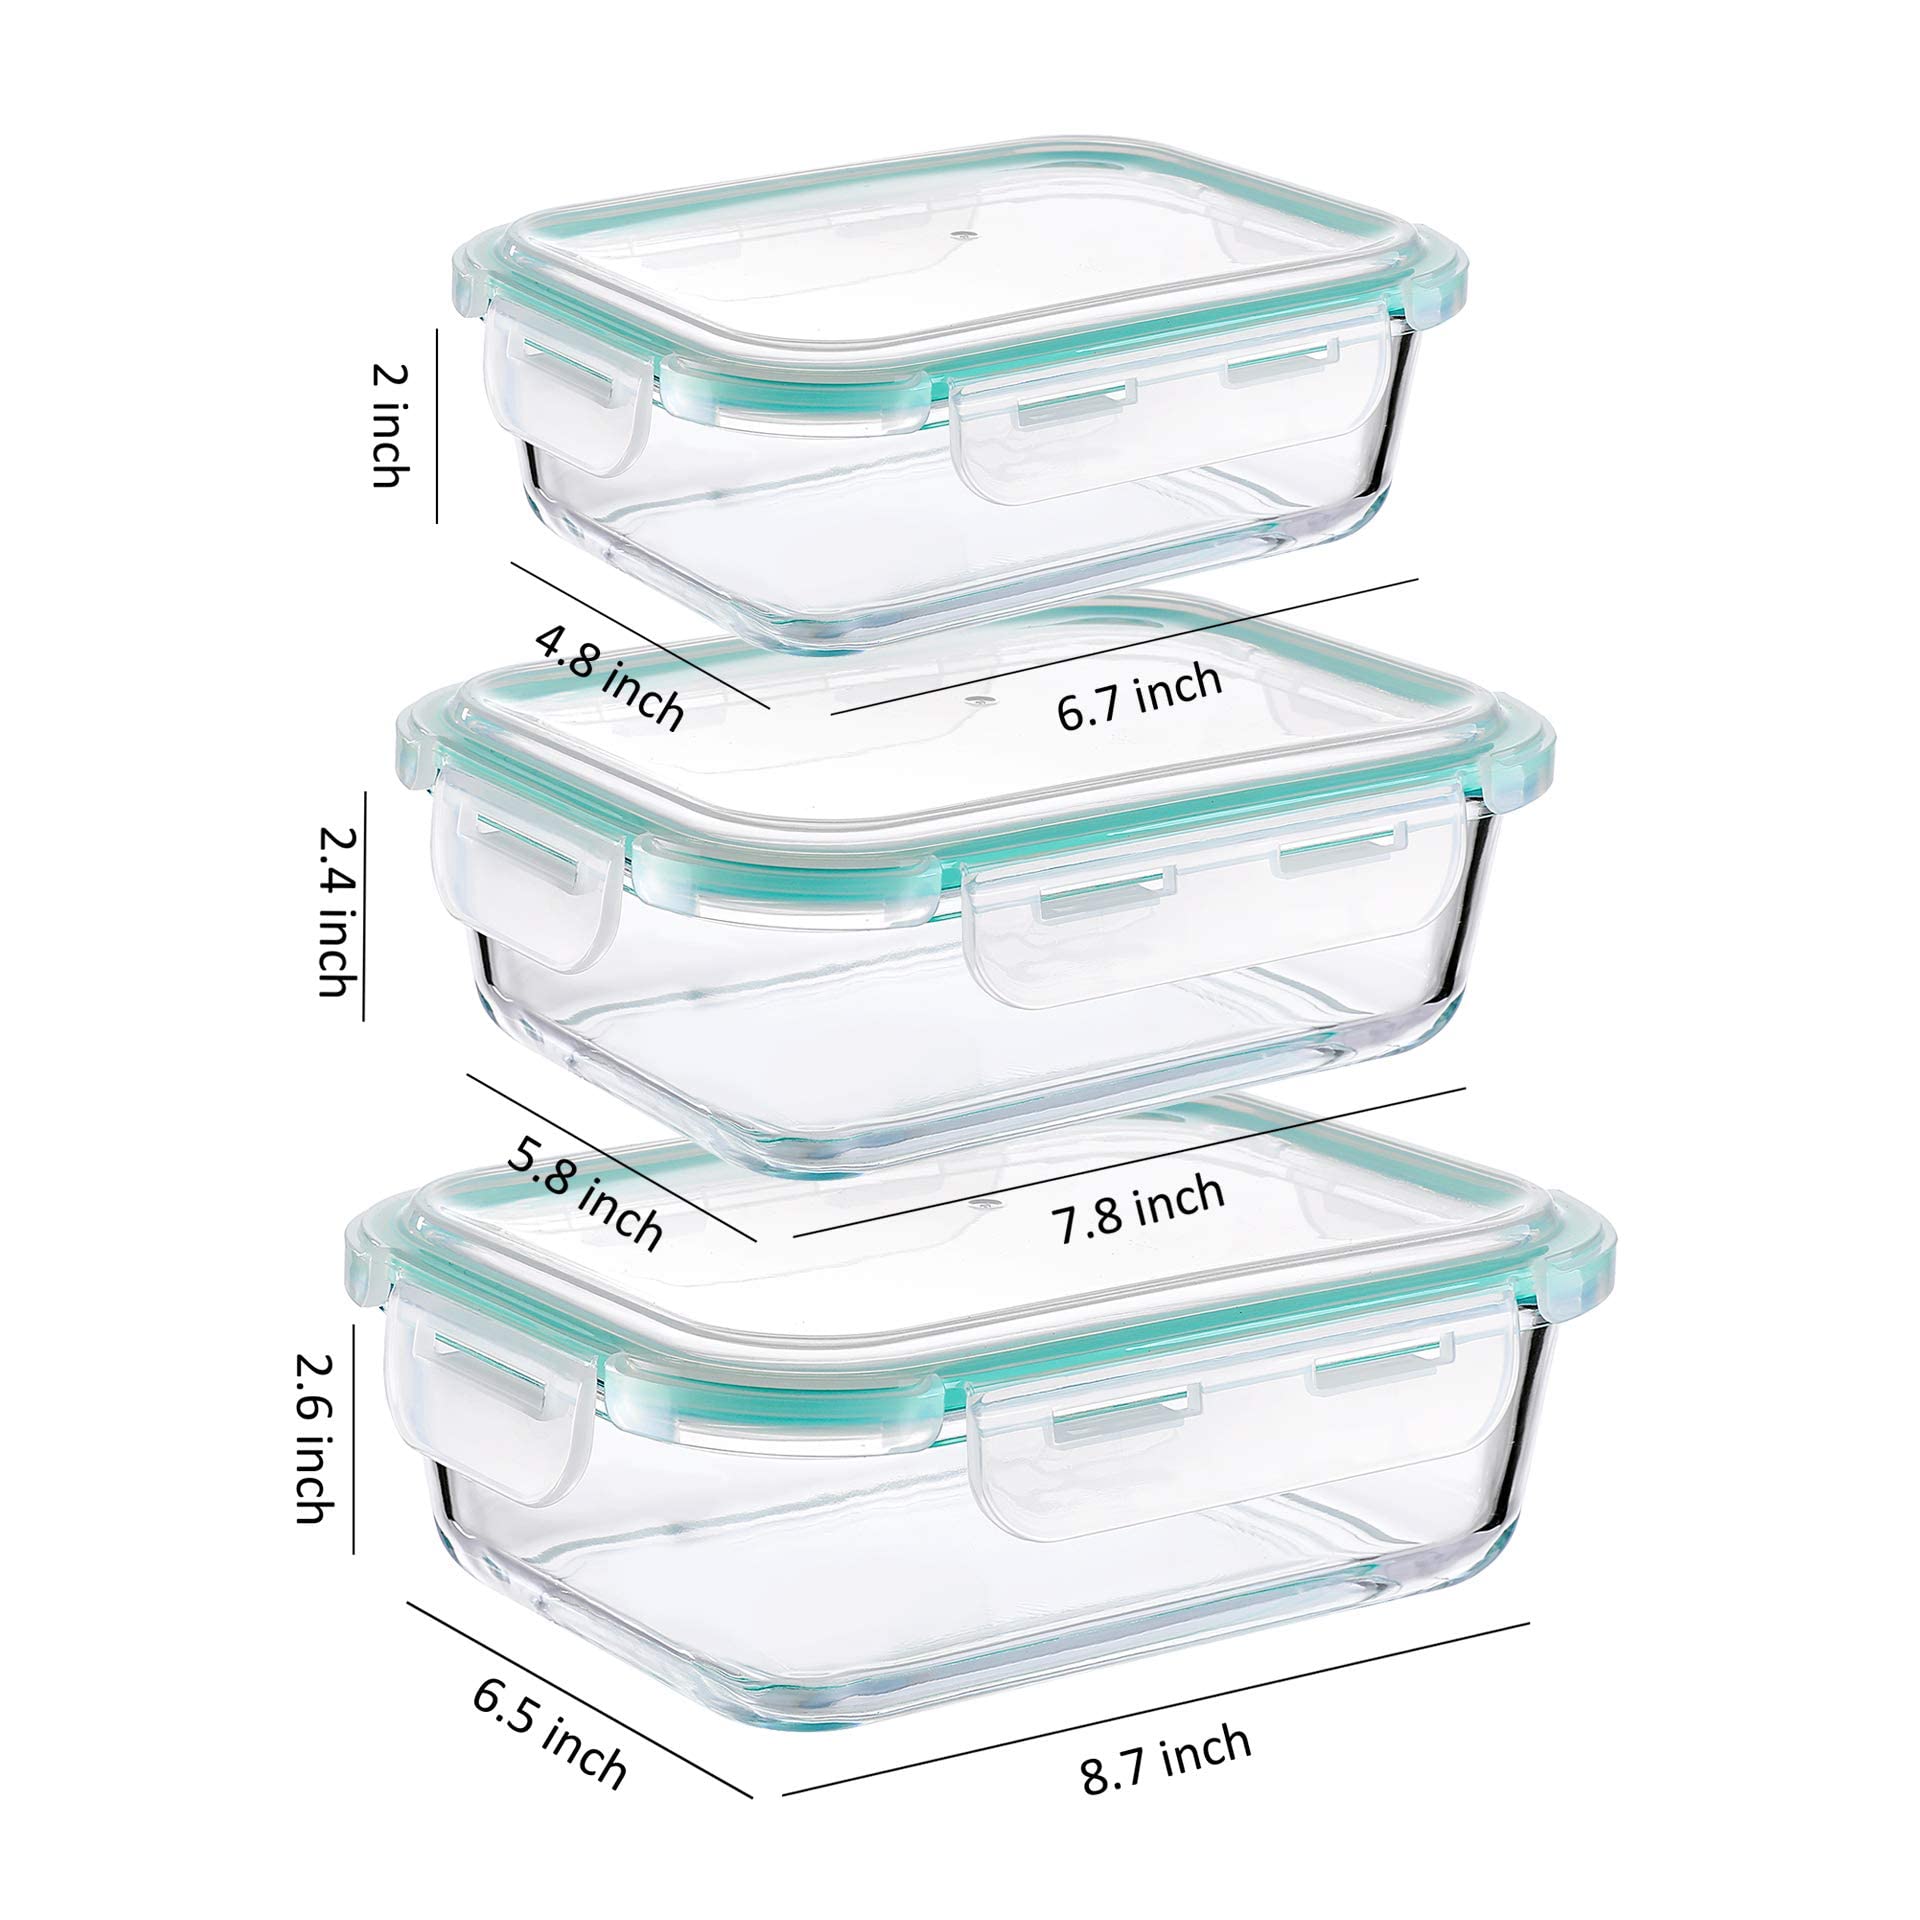 WHOLE HOUSEWARES | Glass Food Storage Containers Meal Prep Pack of 3 in Different Sizes | Food Storage Containers Glass With Lids Airtight | For Meal Prep and Fruit